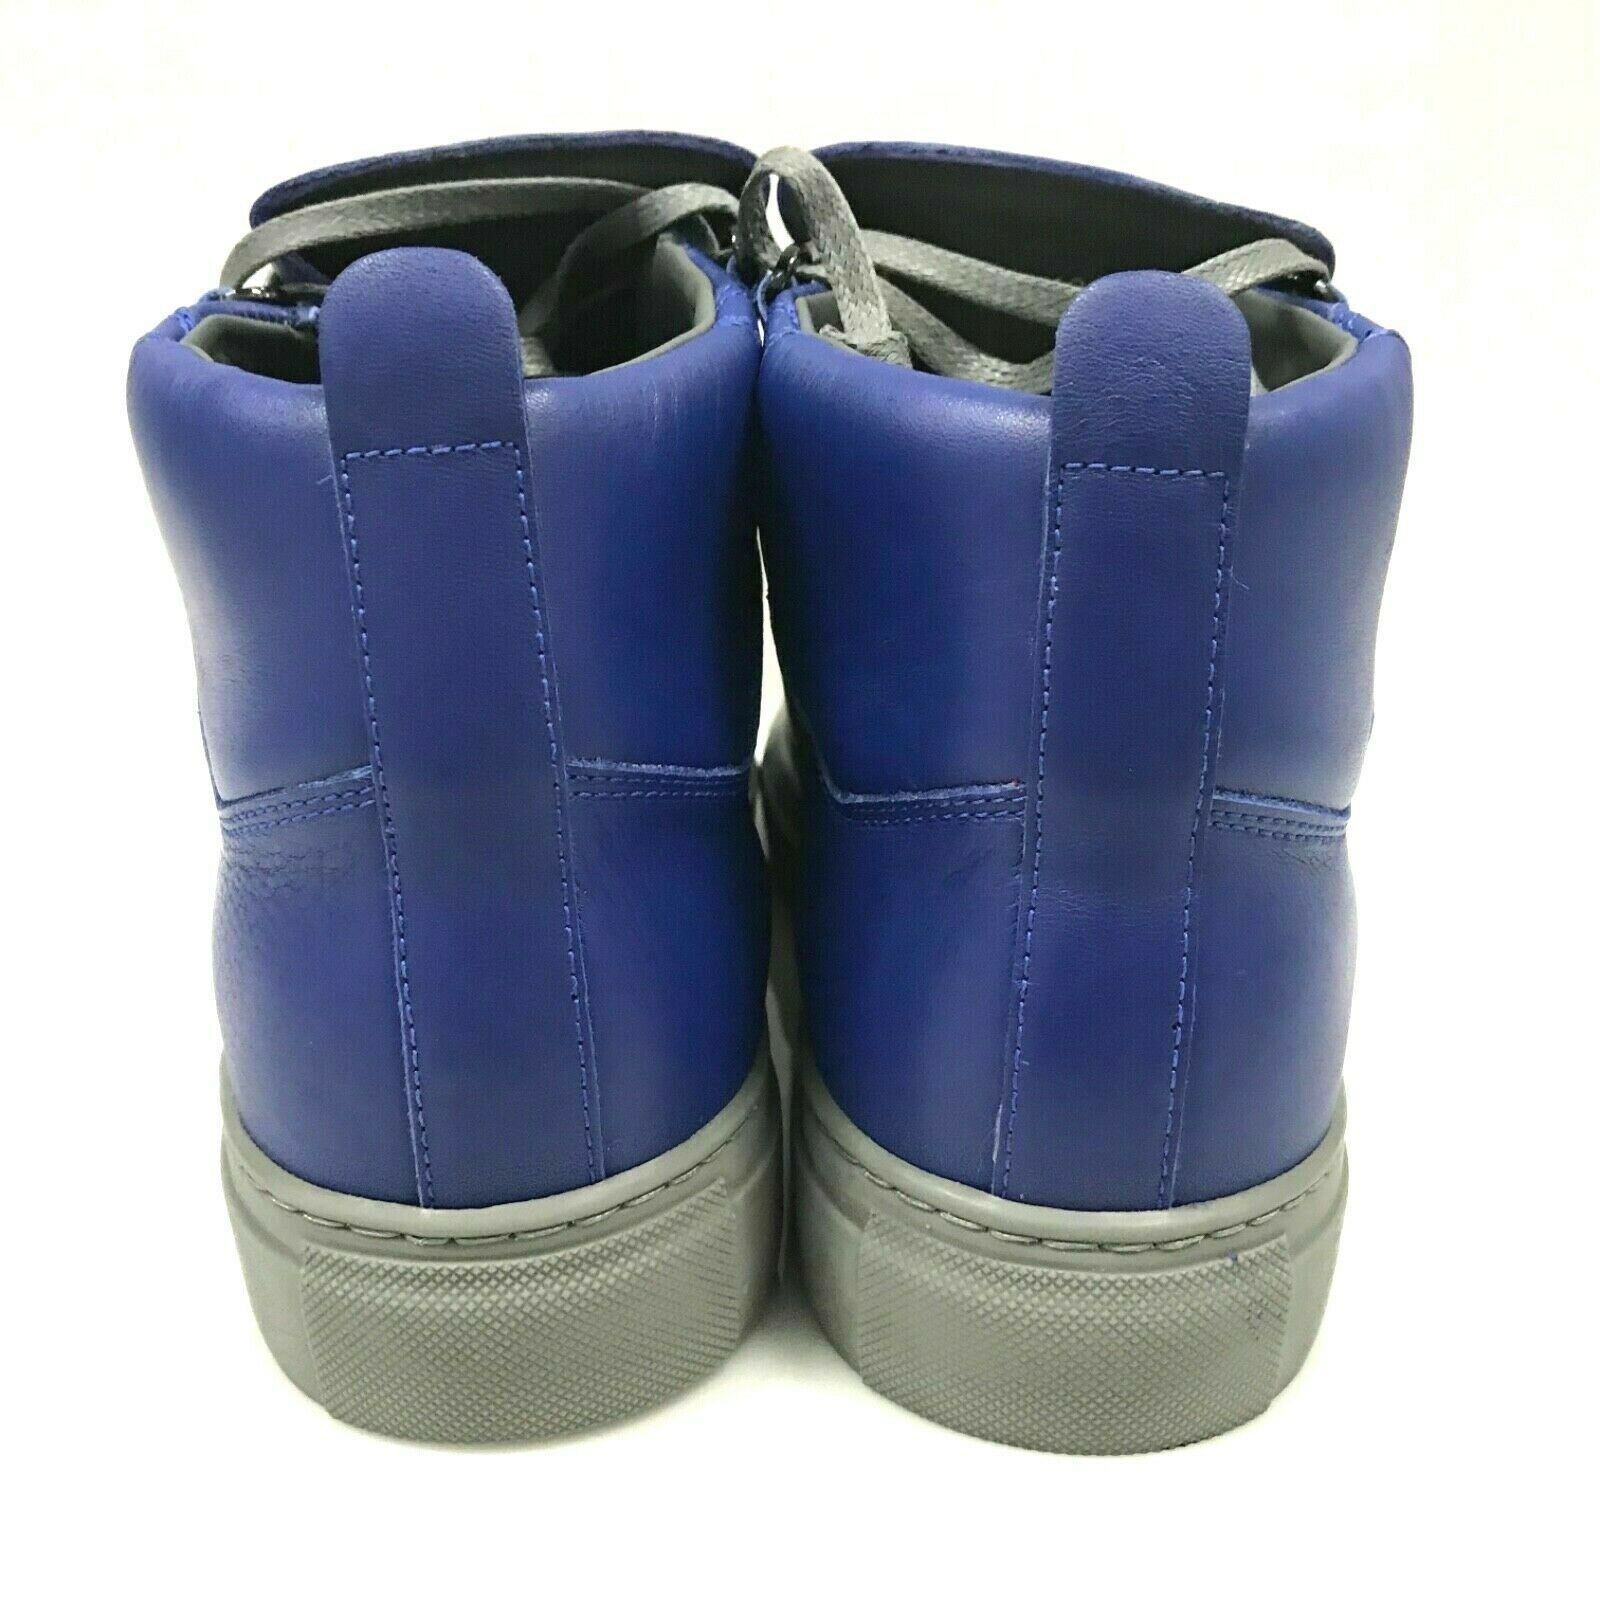 J-3365264 New Balenciaga Electric Blue Leather Sneaker Shoes US 8 ...